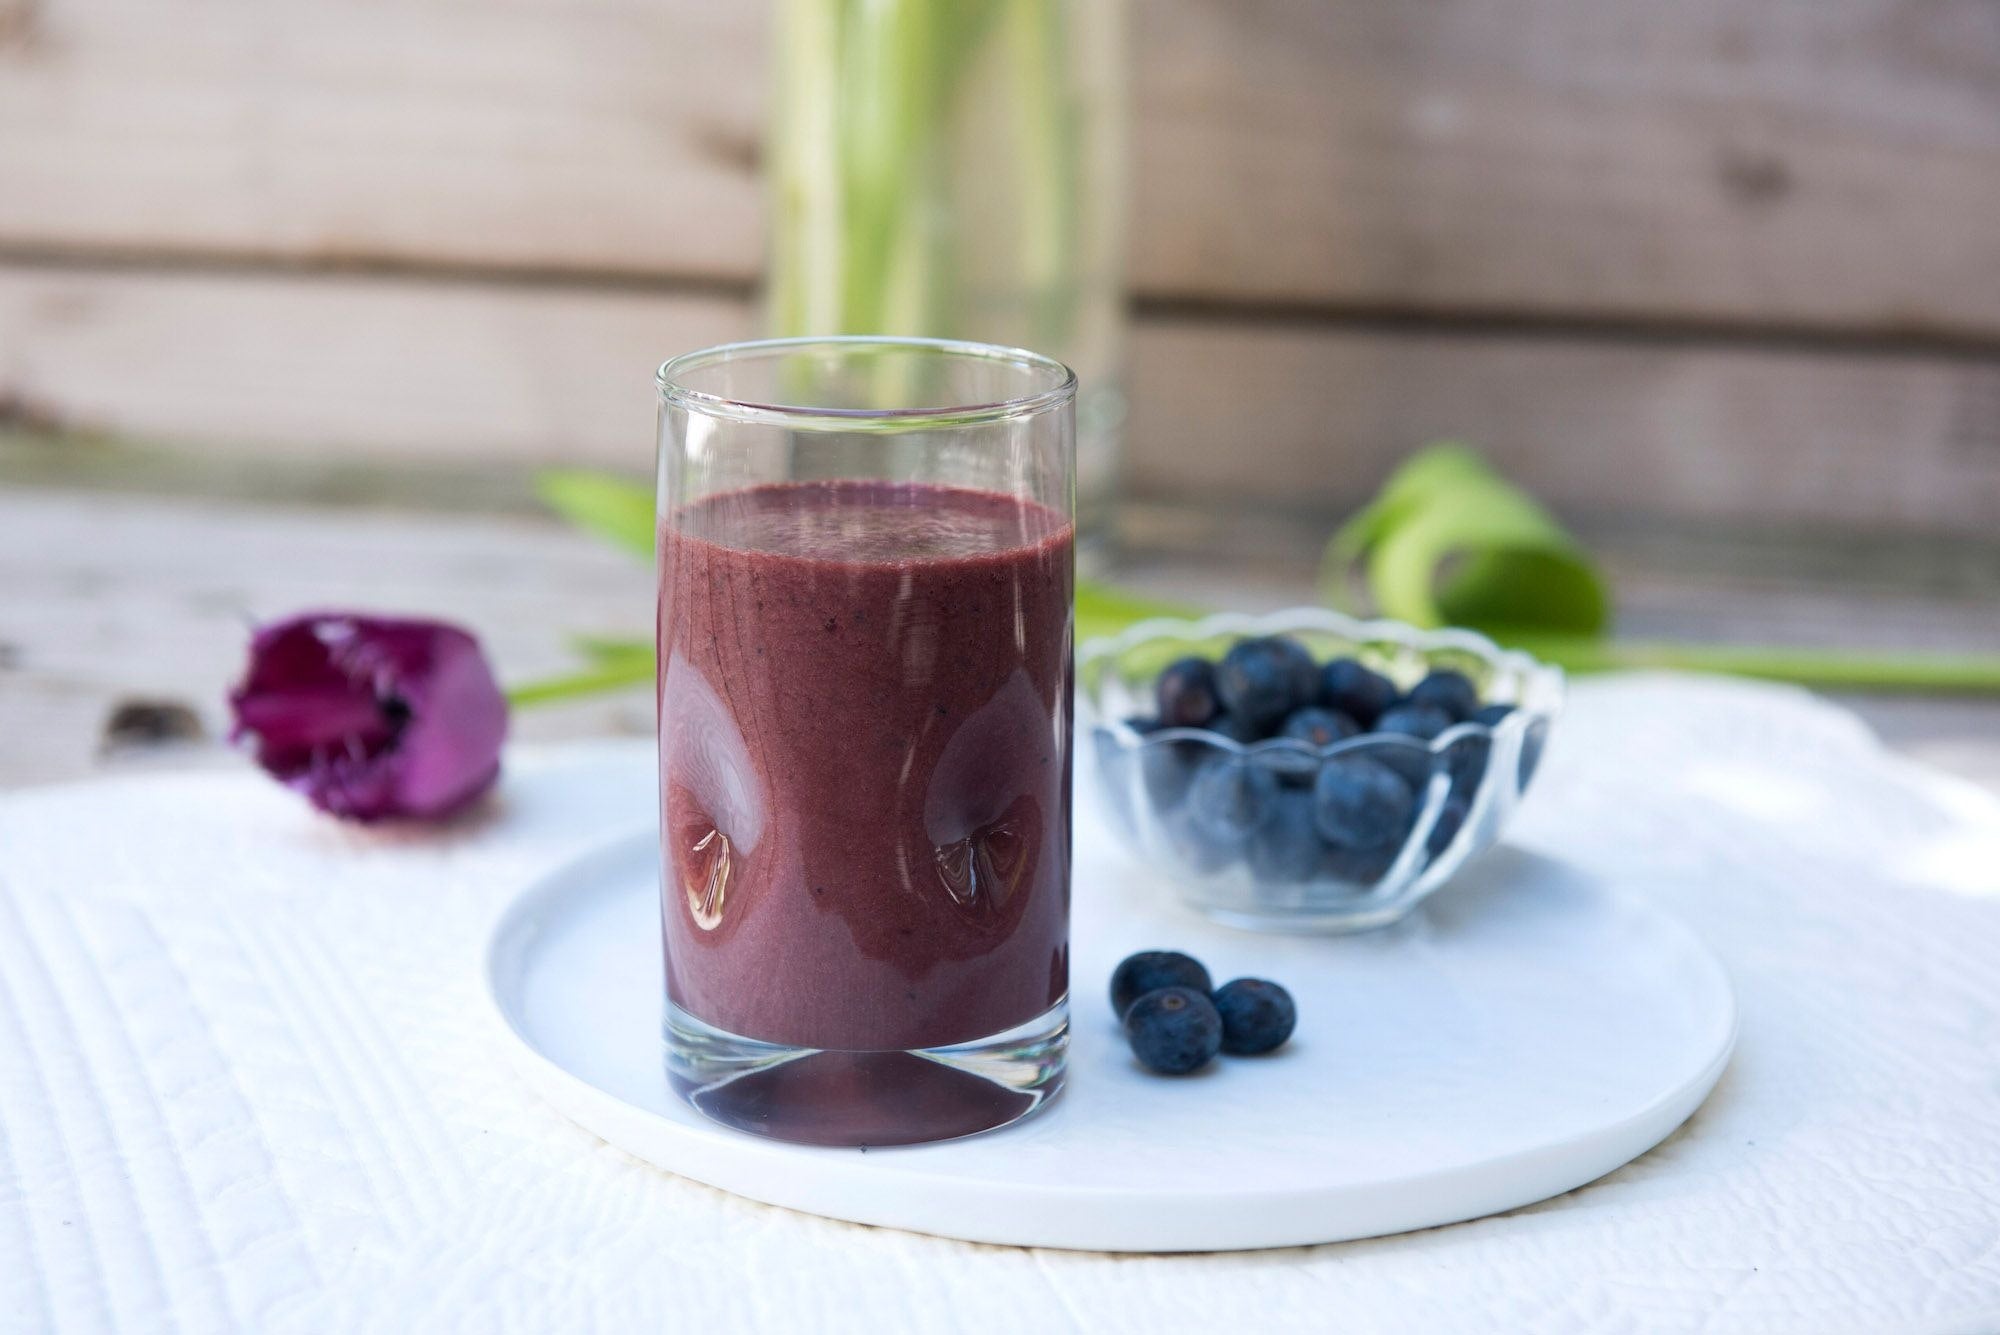 Beauty Berry Smoothie